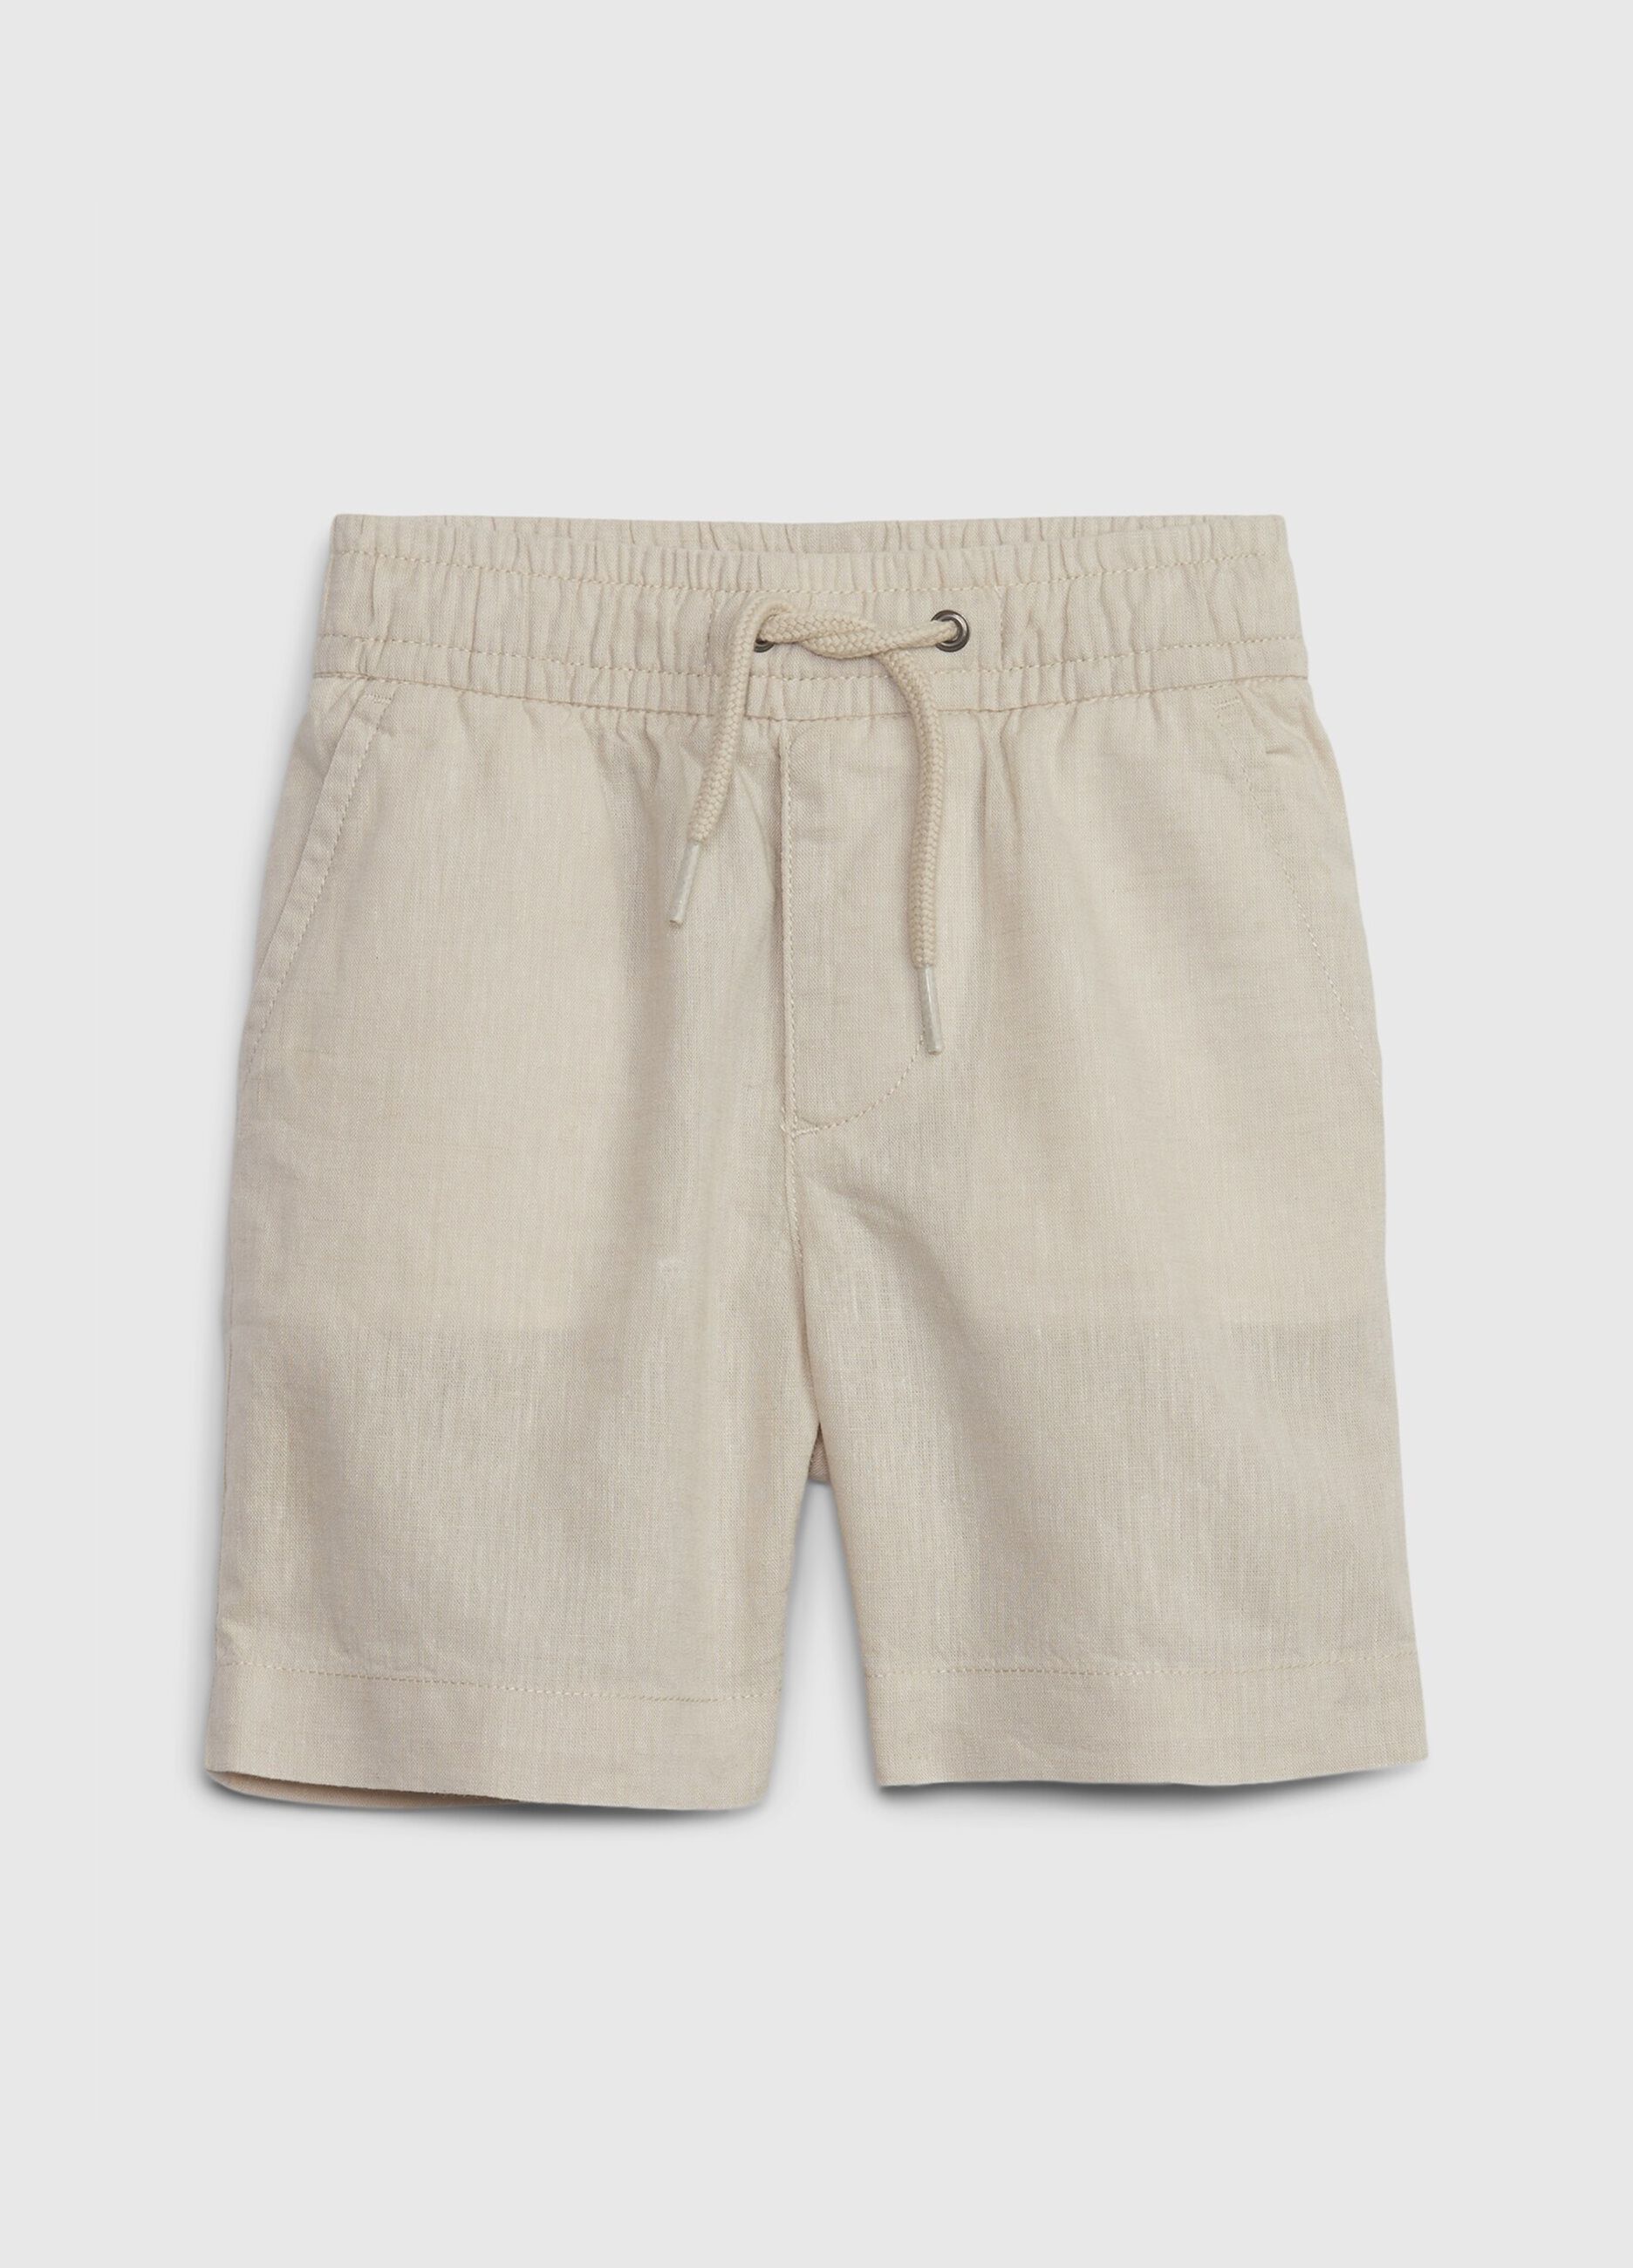 Cotton and linen shorts with drawstring